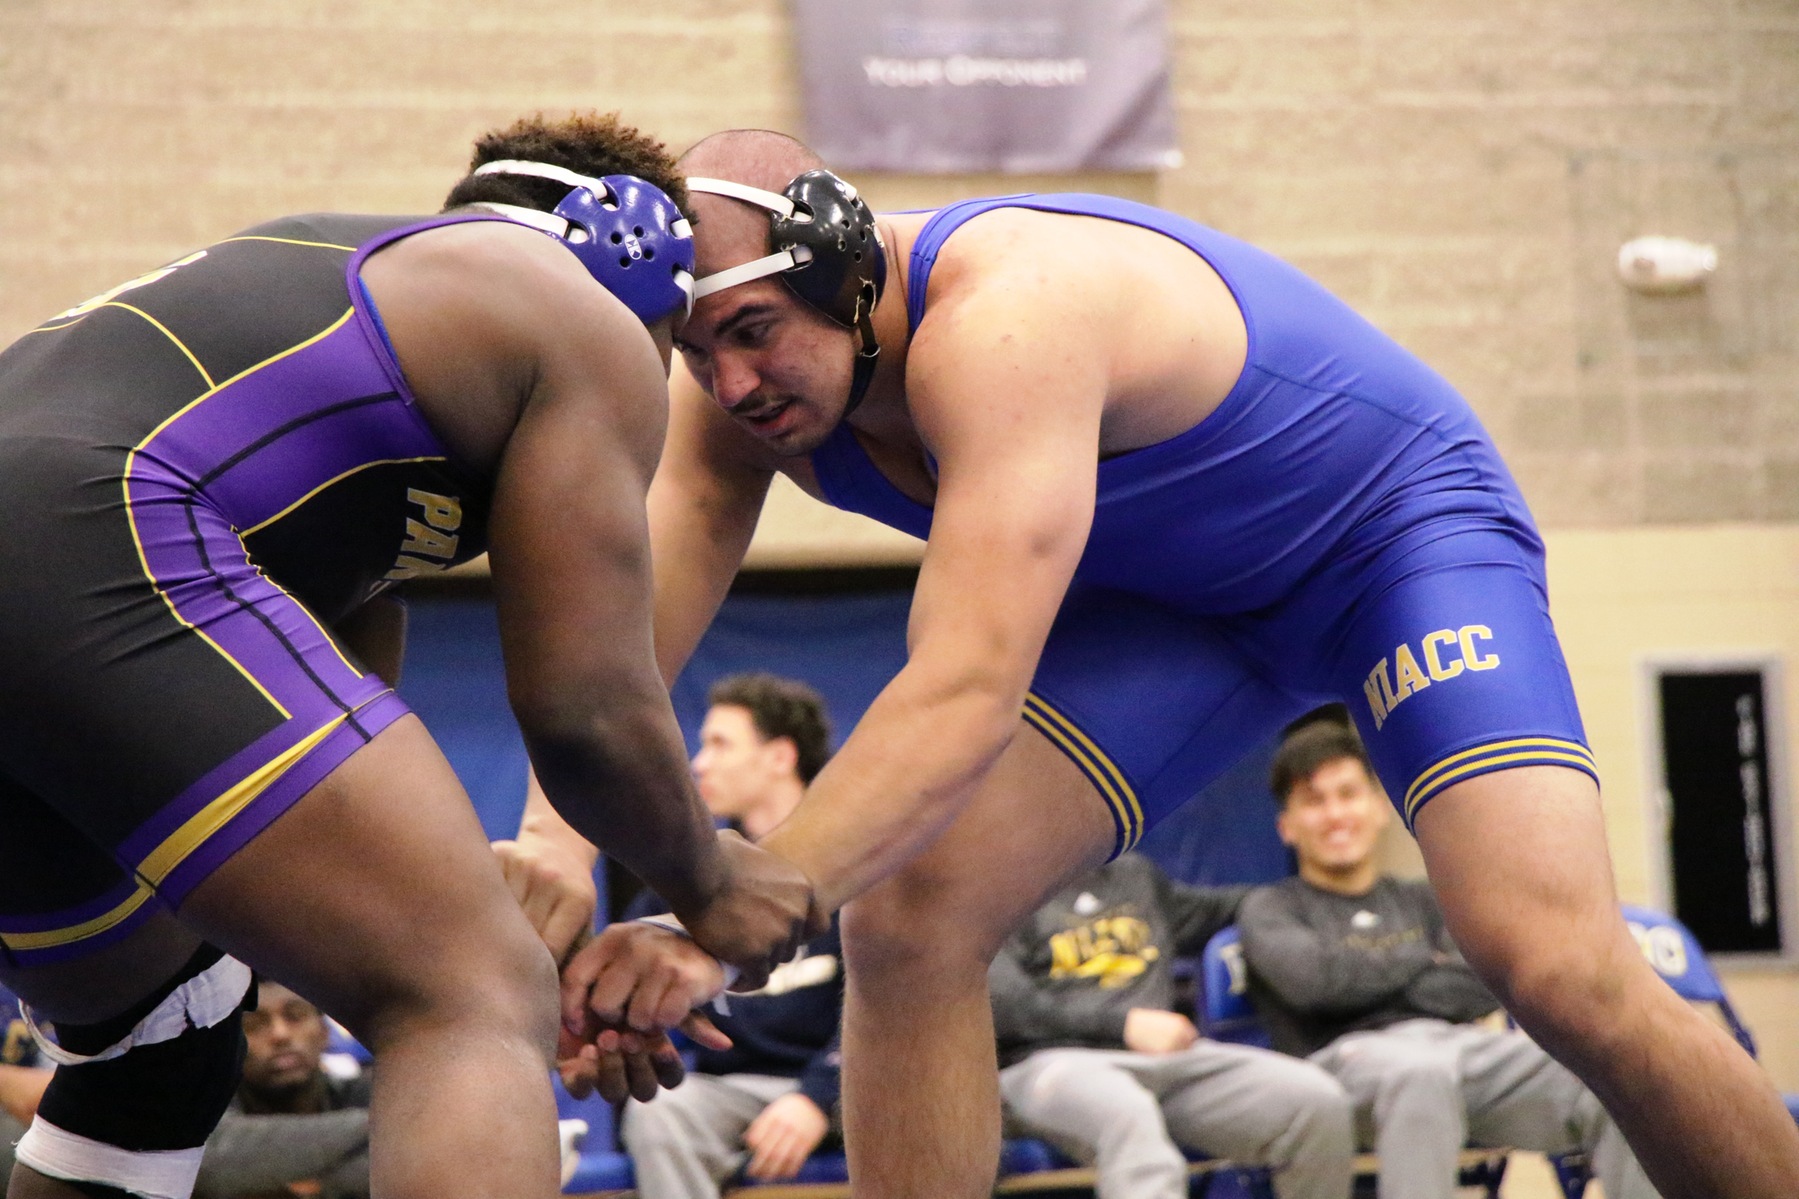 NIACC's 285-pounder Jimsher Sidhu enters tonight's dual with a record of 6-5.